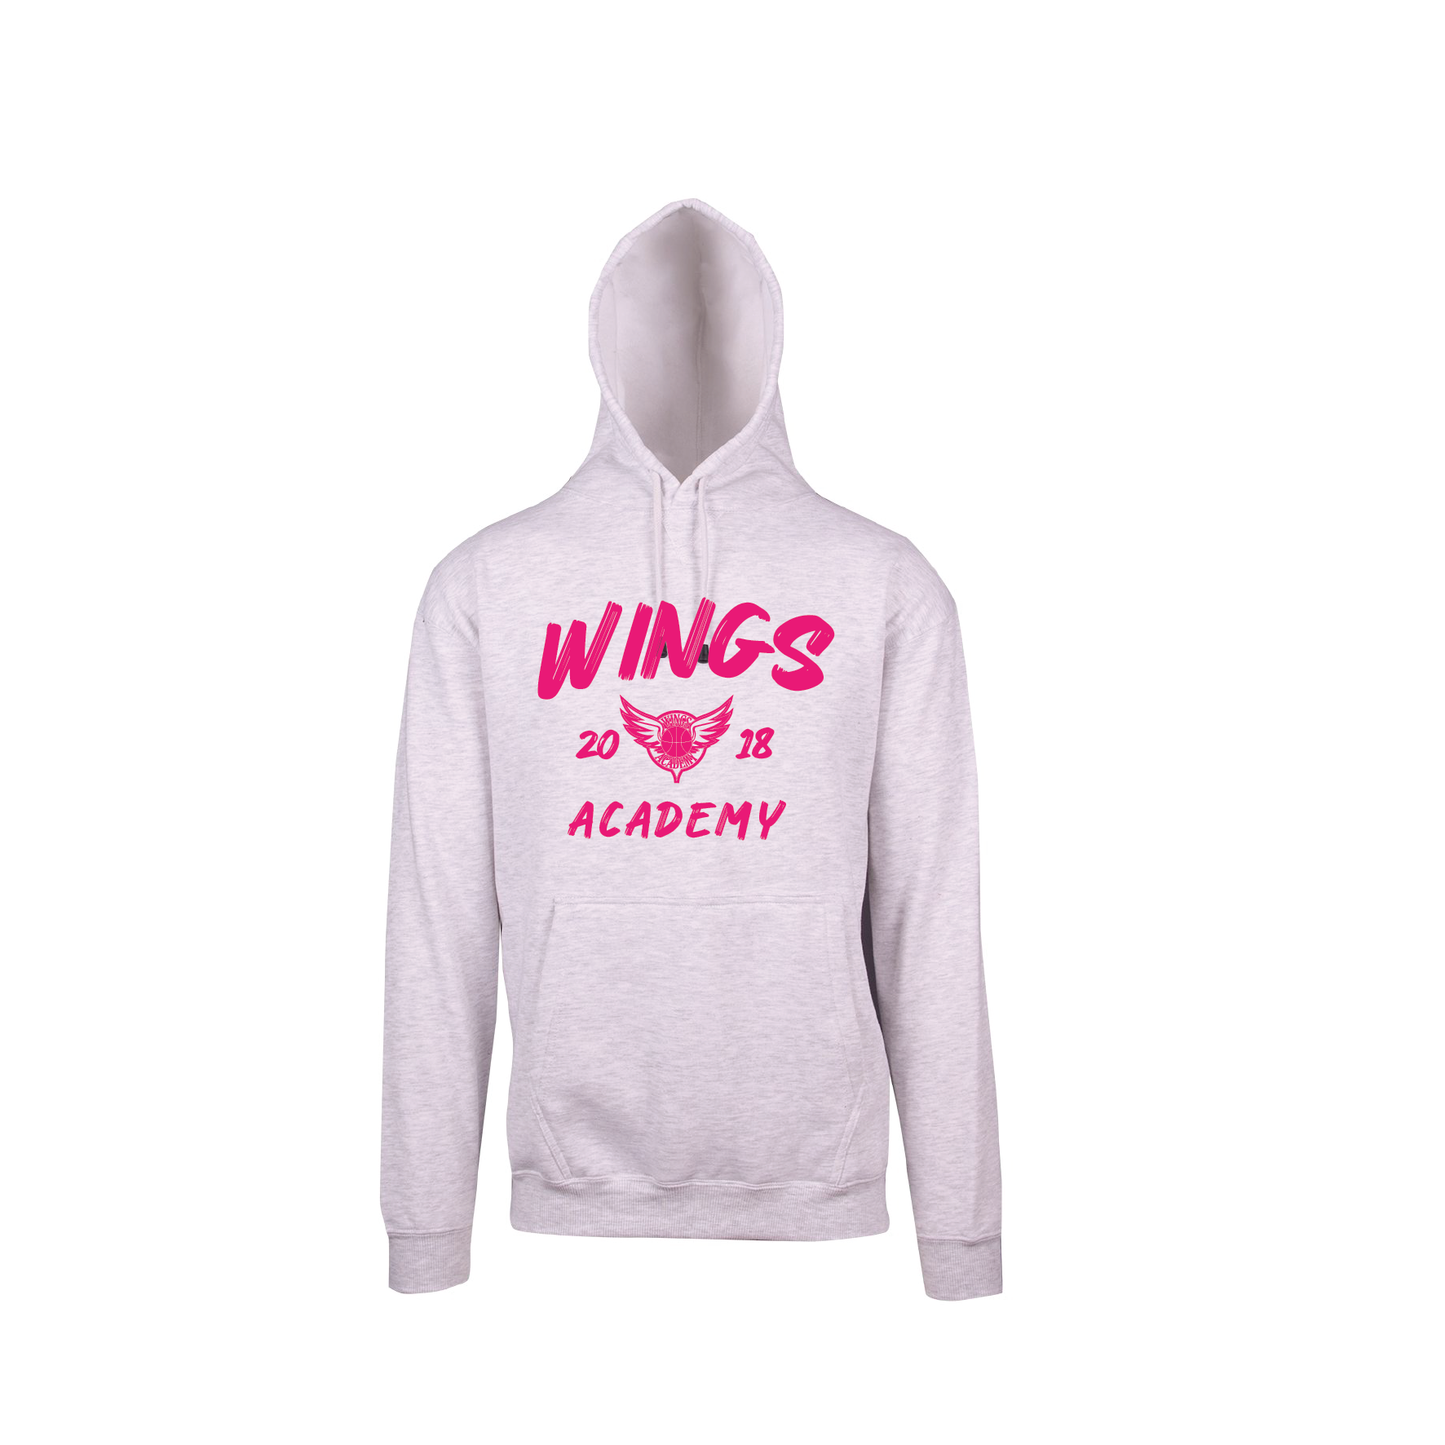 WINGS SUPPORTER HOODIE - MARLE WHITE